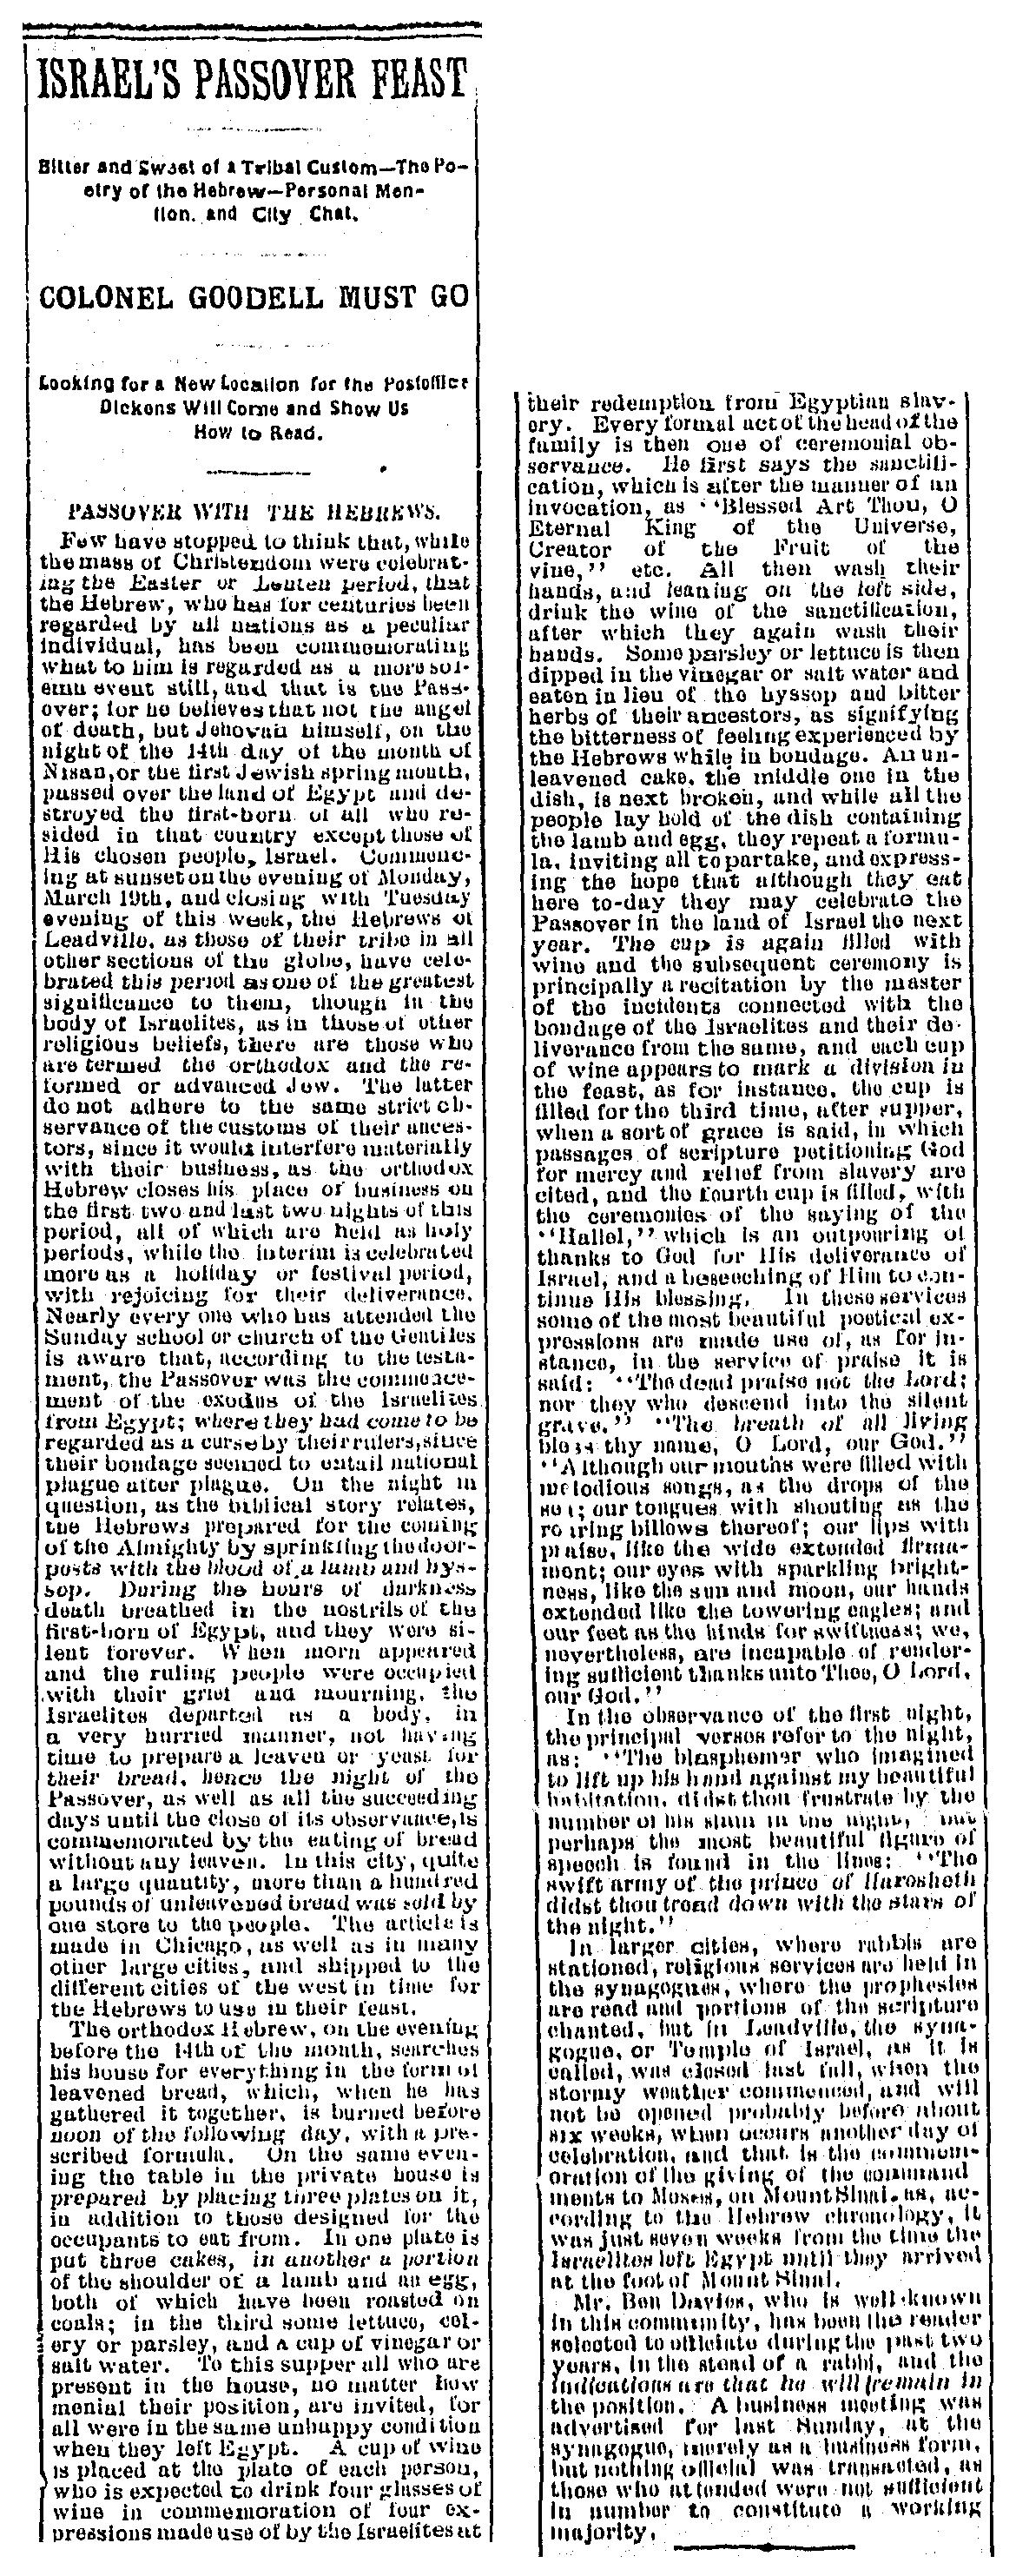 The Leadville Herald Democrat. Wednesday, April 4, 1888. Page 3.